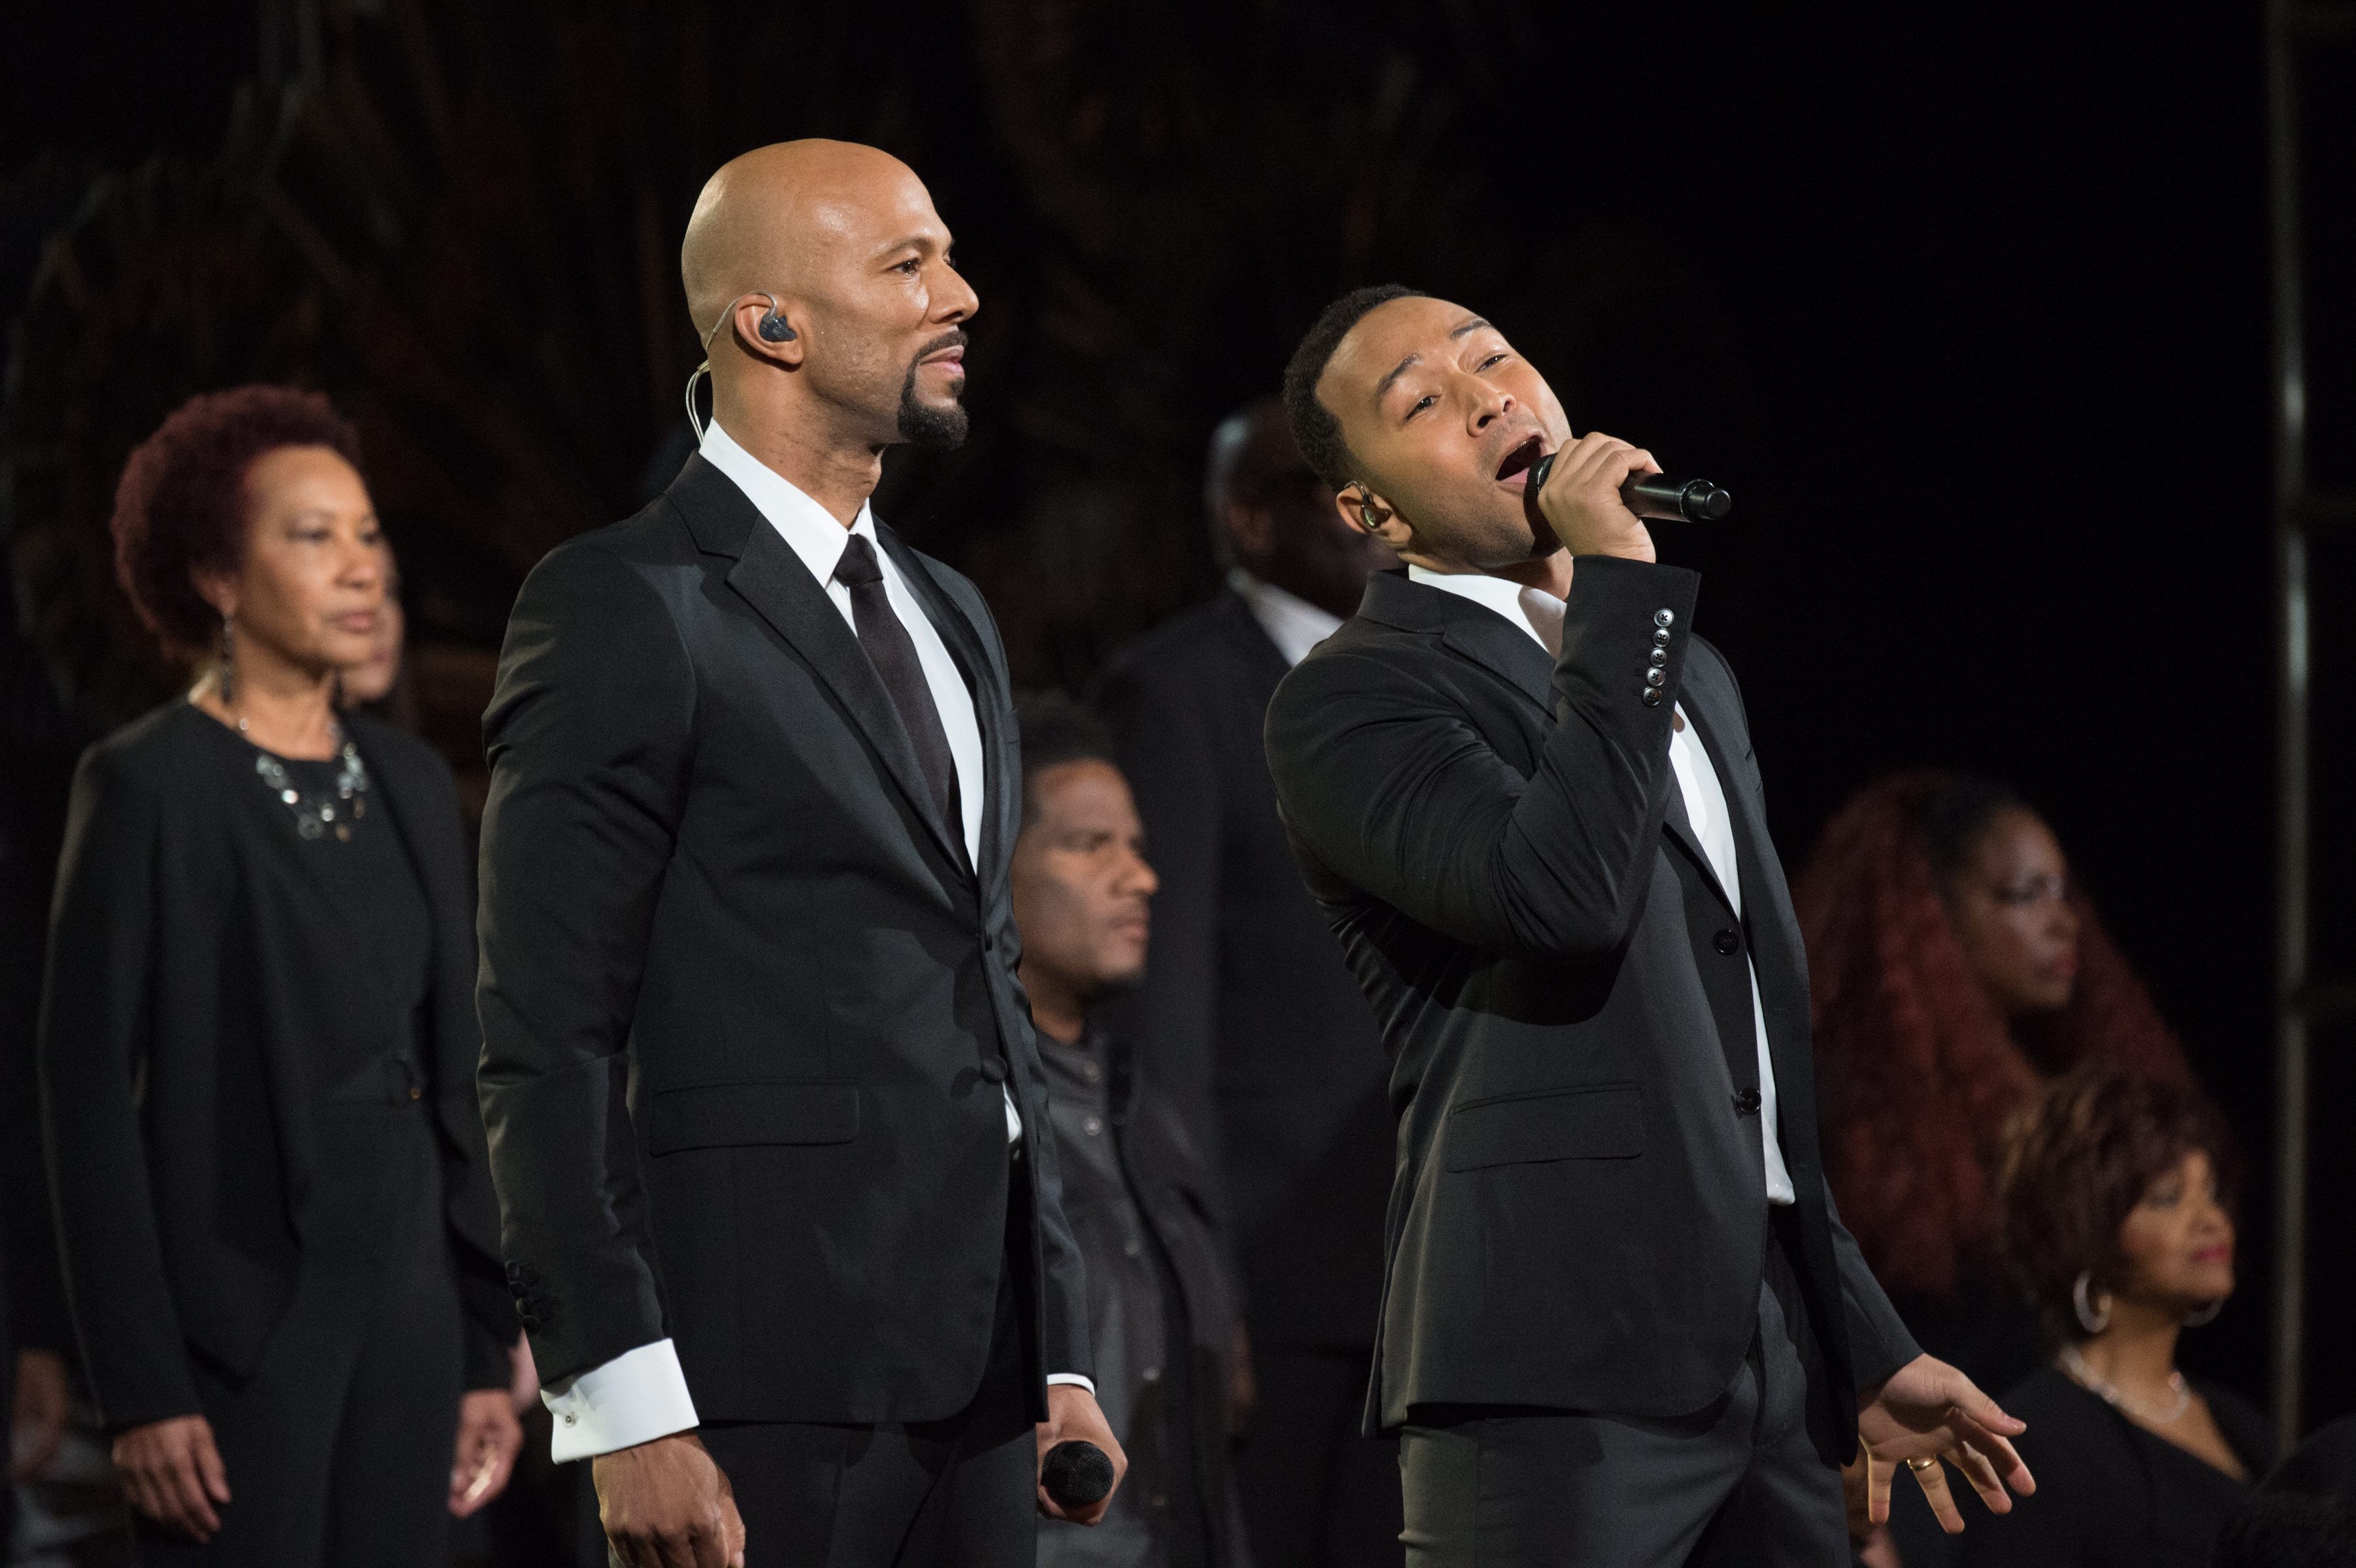 Lonnie Lynn, aka Common, and John Stephens, right, aka John Legend, perform onstage during the 87th Oscars ceremony at the Dolby Theatre in Hollywood, California, on February 22, 2015. Photo: EPA